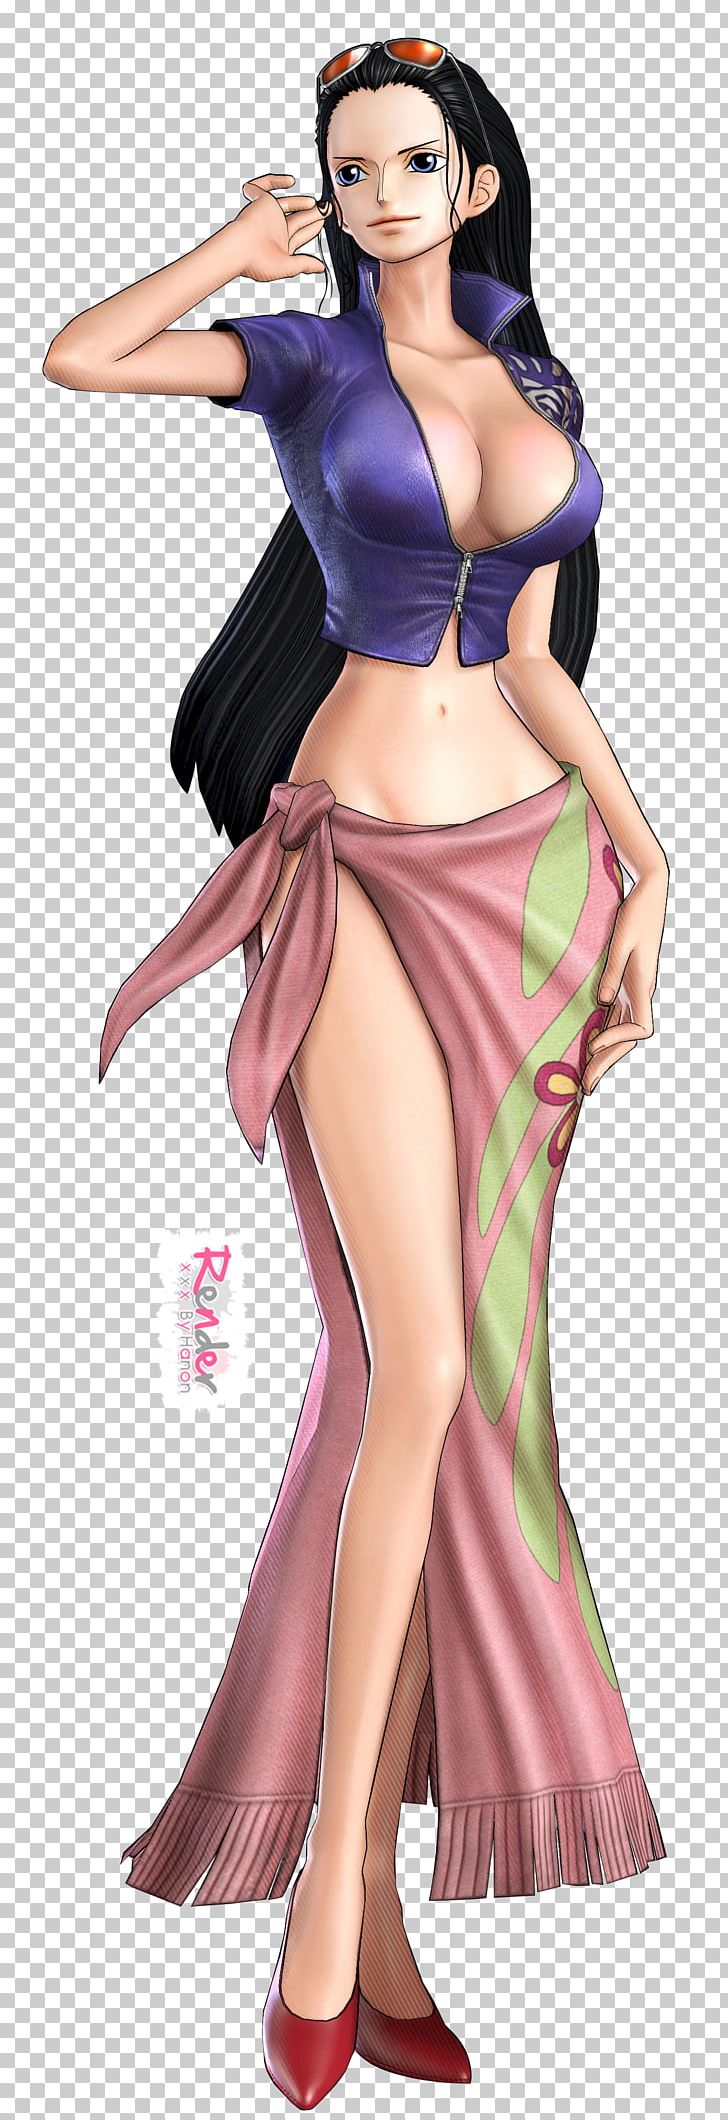 Nico Robin One Piece: Pirate Warriors 2 Monkey D. Luffy Nami PNG, Clipart, Black Hair, Cartoon, Fashion Design, Fictional Character, Girl Free PNG Download